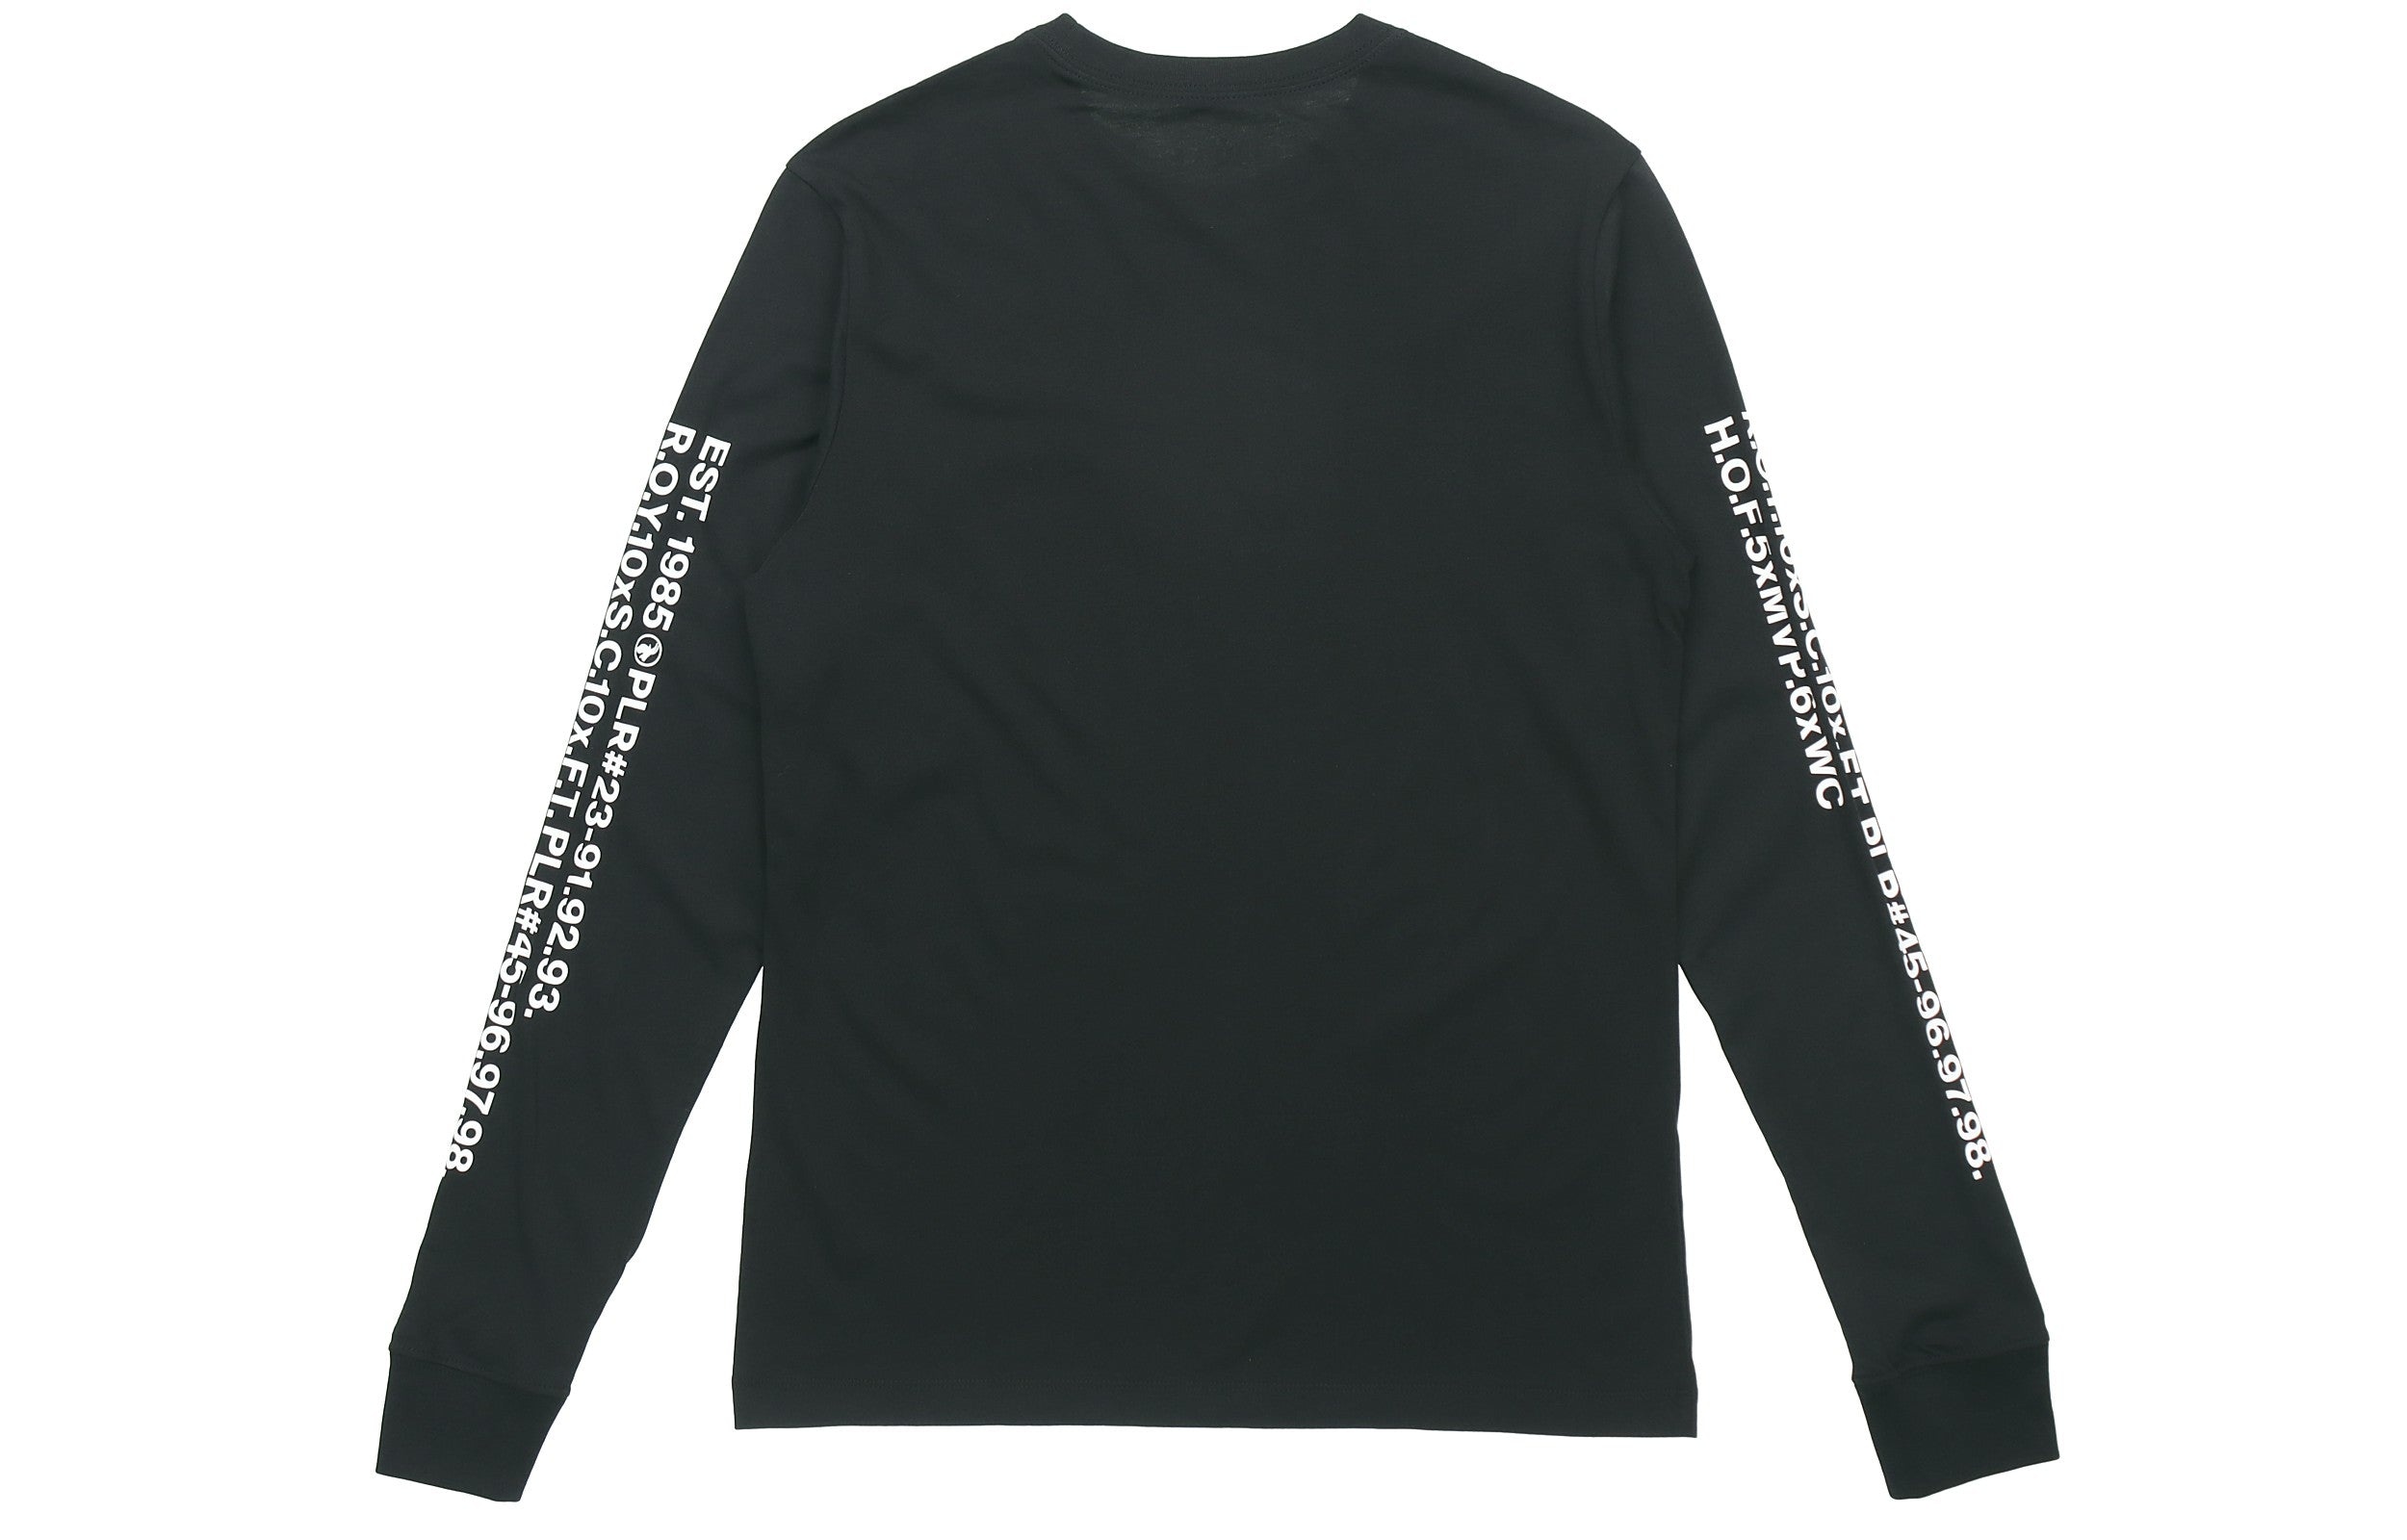 Air Jordan Embroidered Alphabet Printing Casual Sports Round Neck Long Sleeves Black DC6647-010 - 2